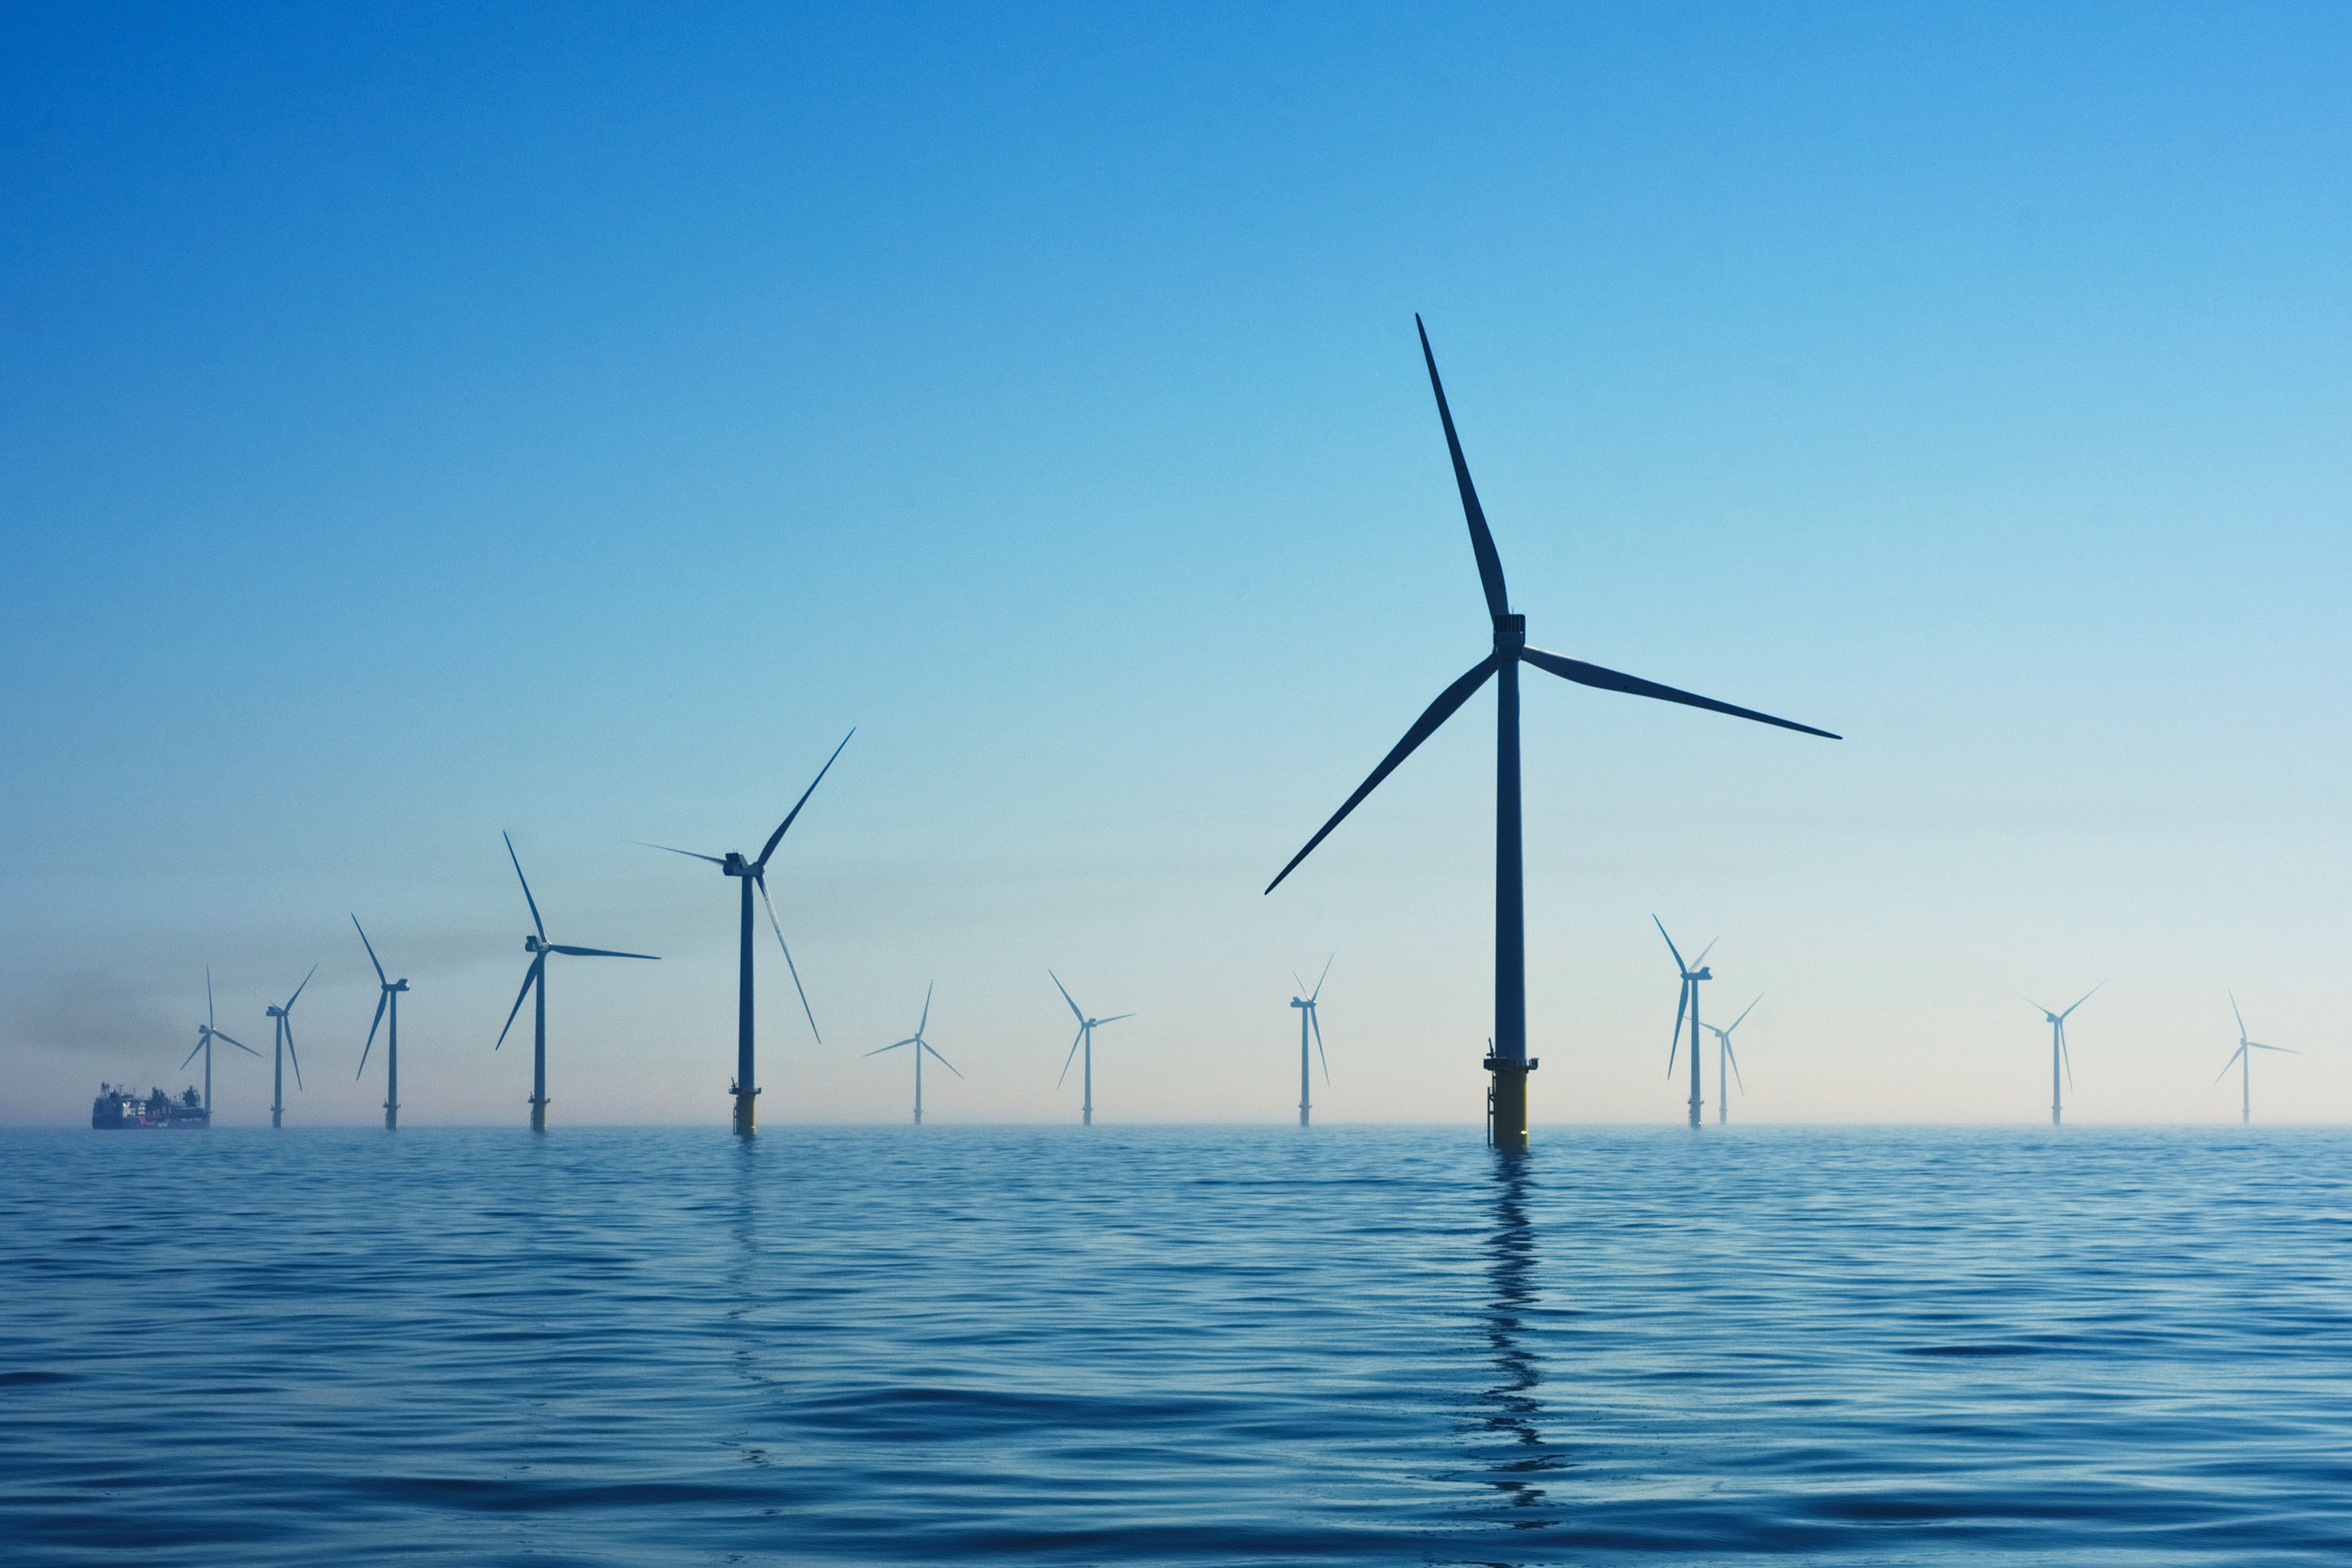 Impressed Current Cathodic Protection for Offshore Wind Turbine Foundations